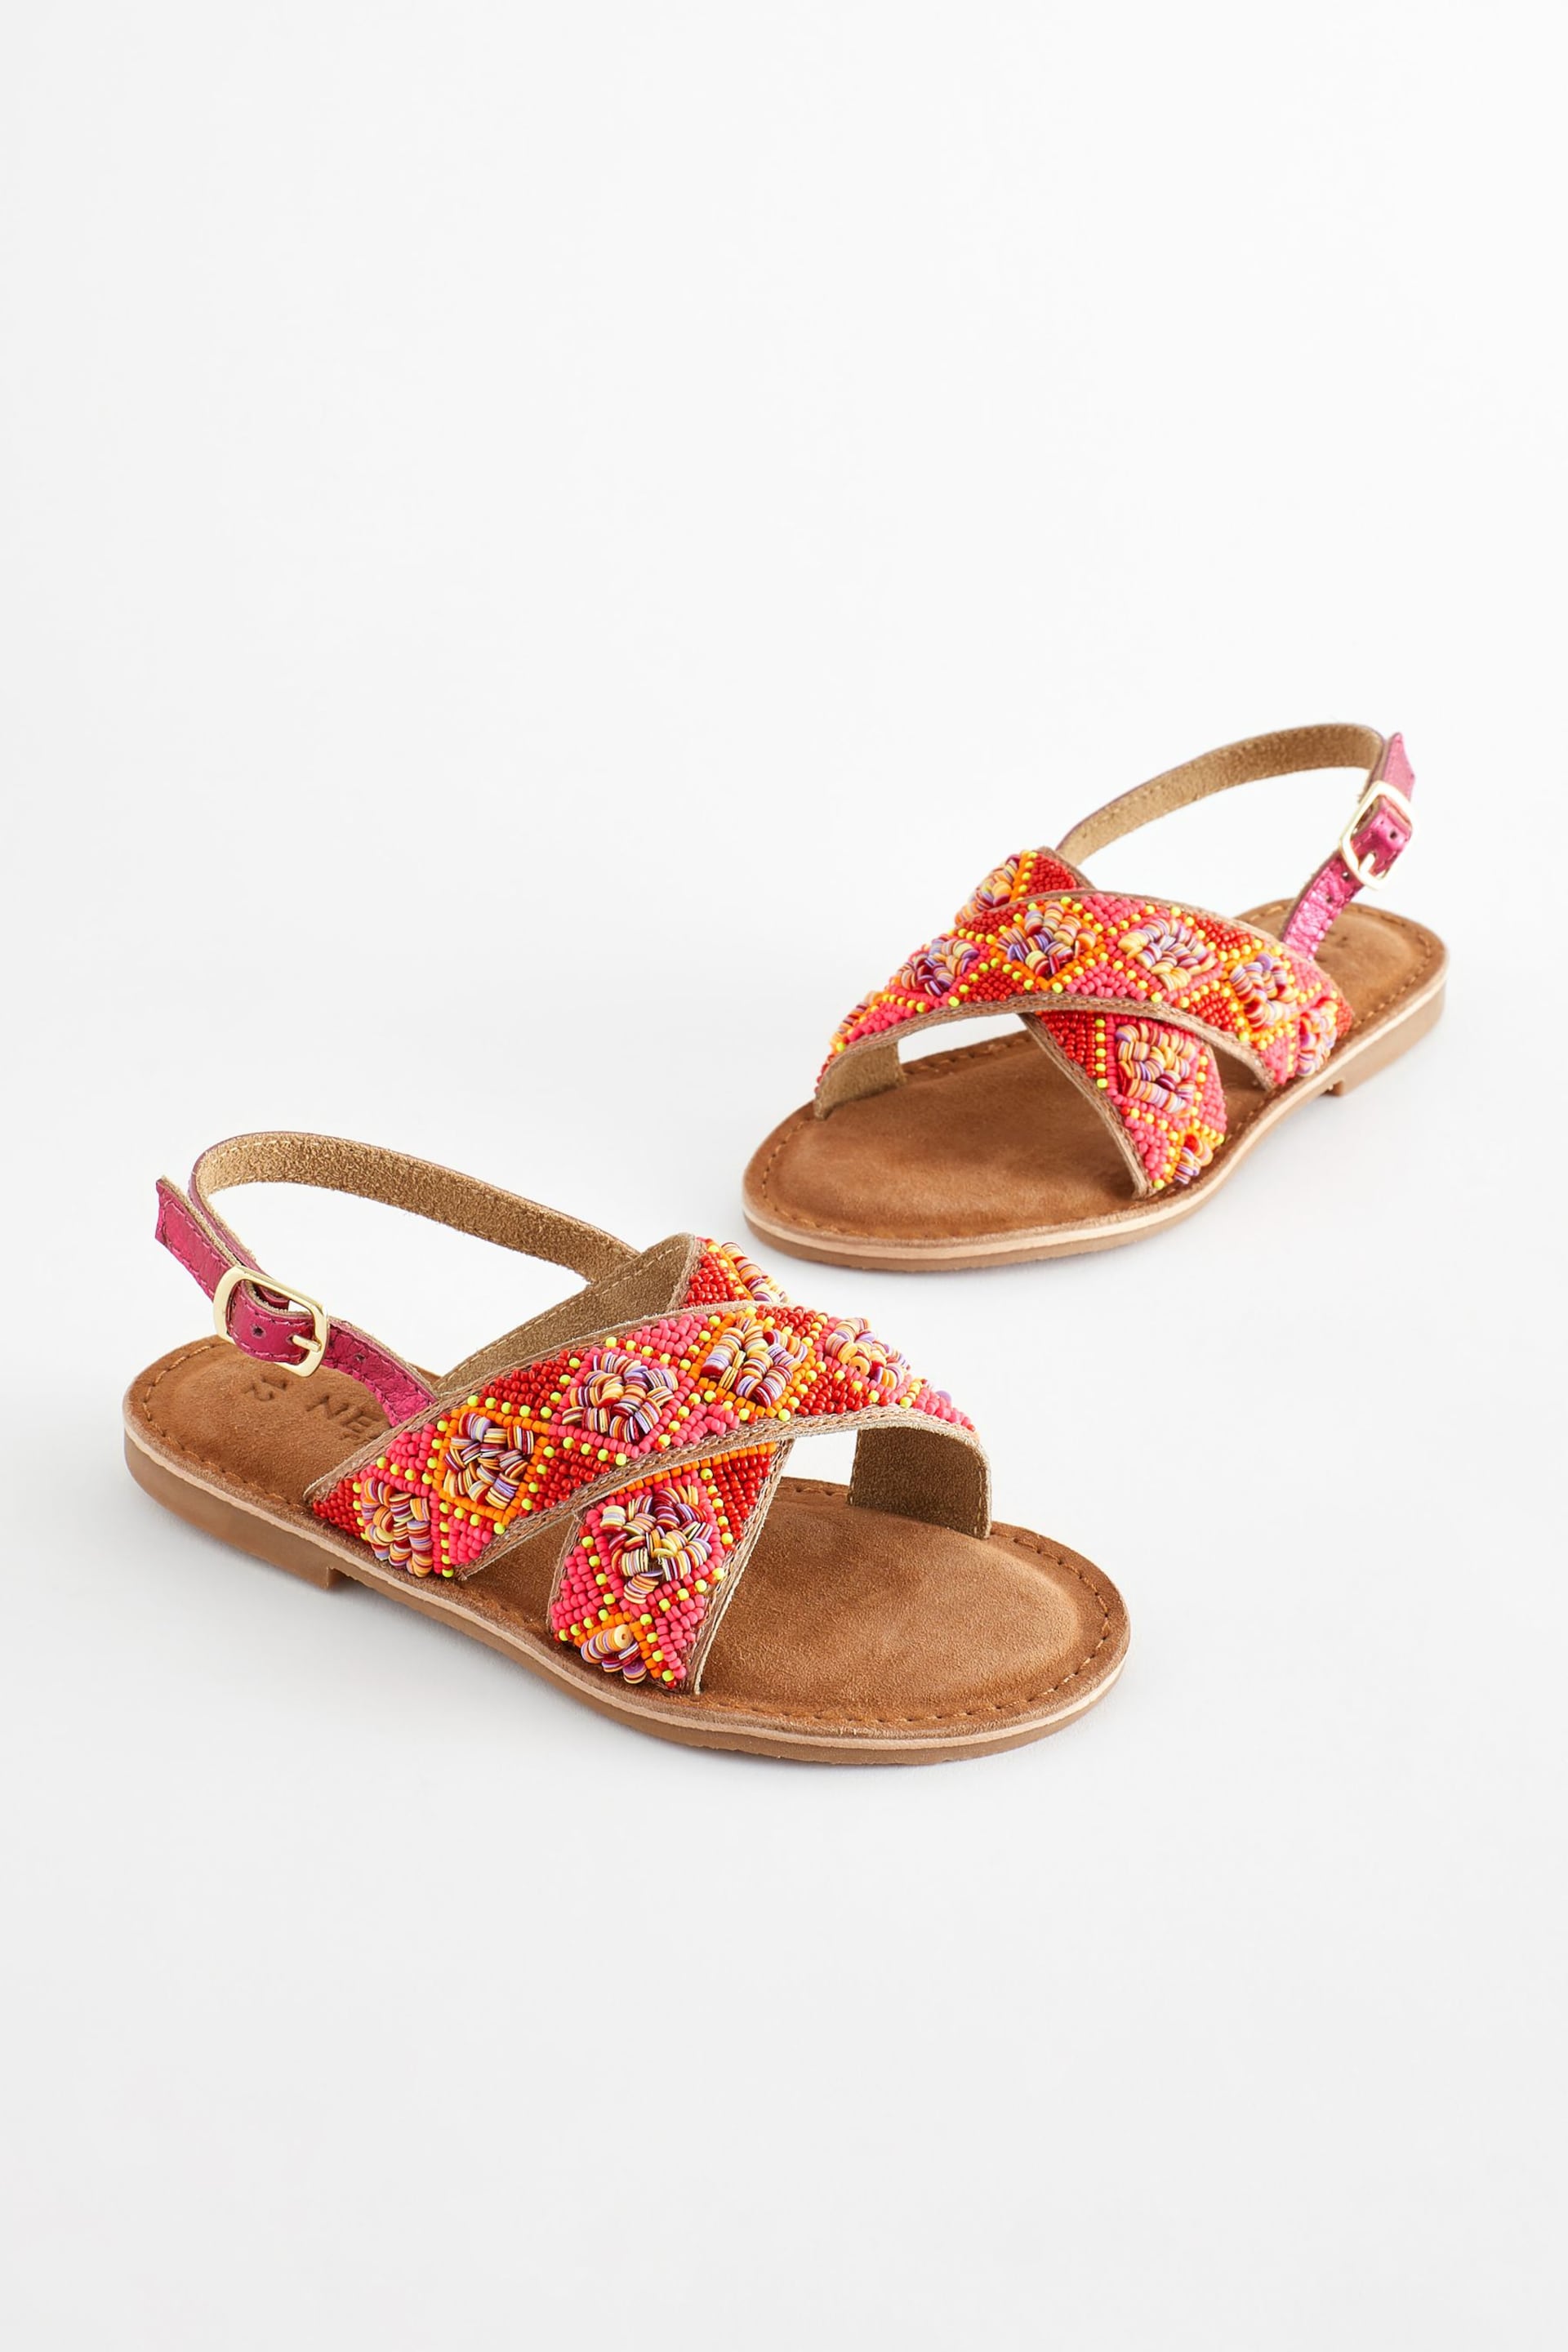 Red Orange Beaded Leather Cross Strap Sandals - Image 1 of 6